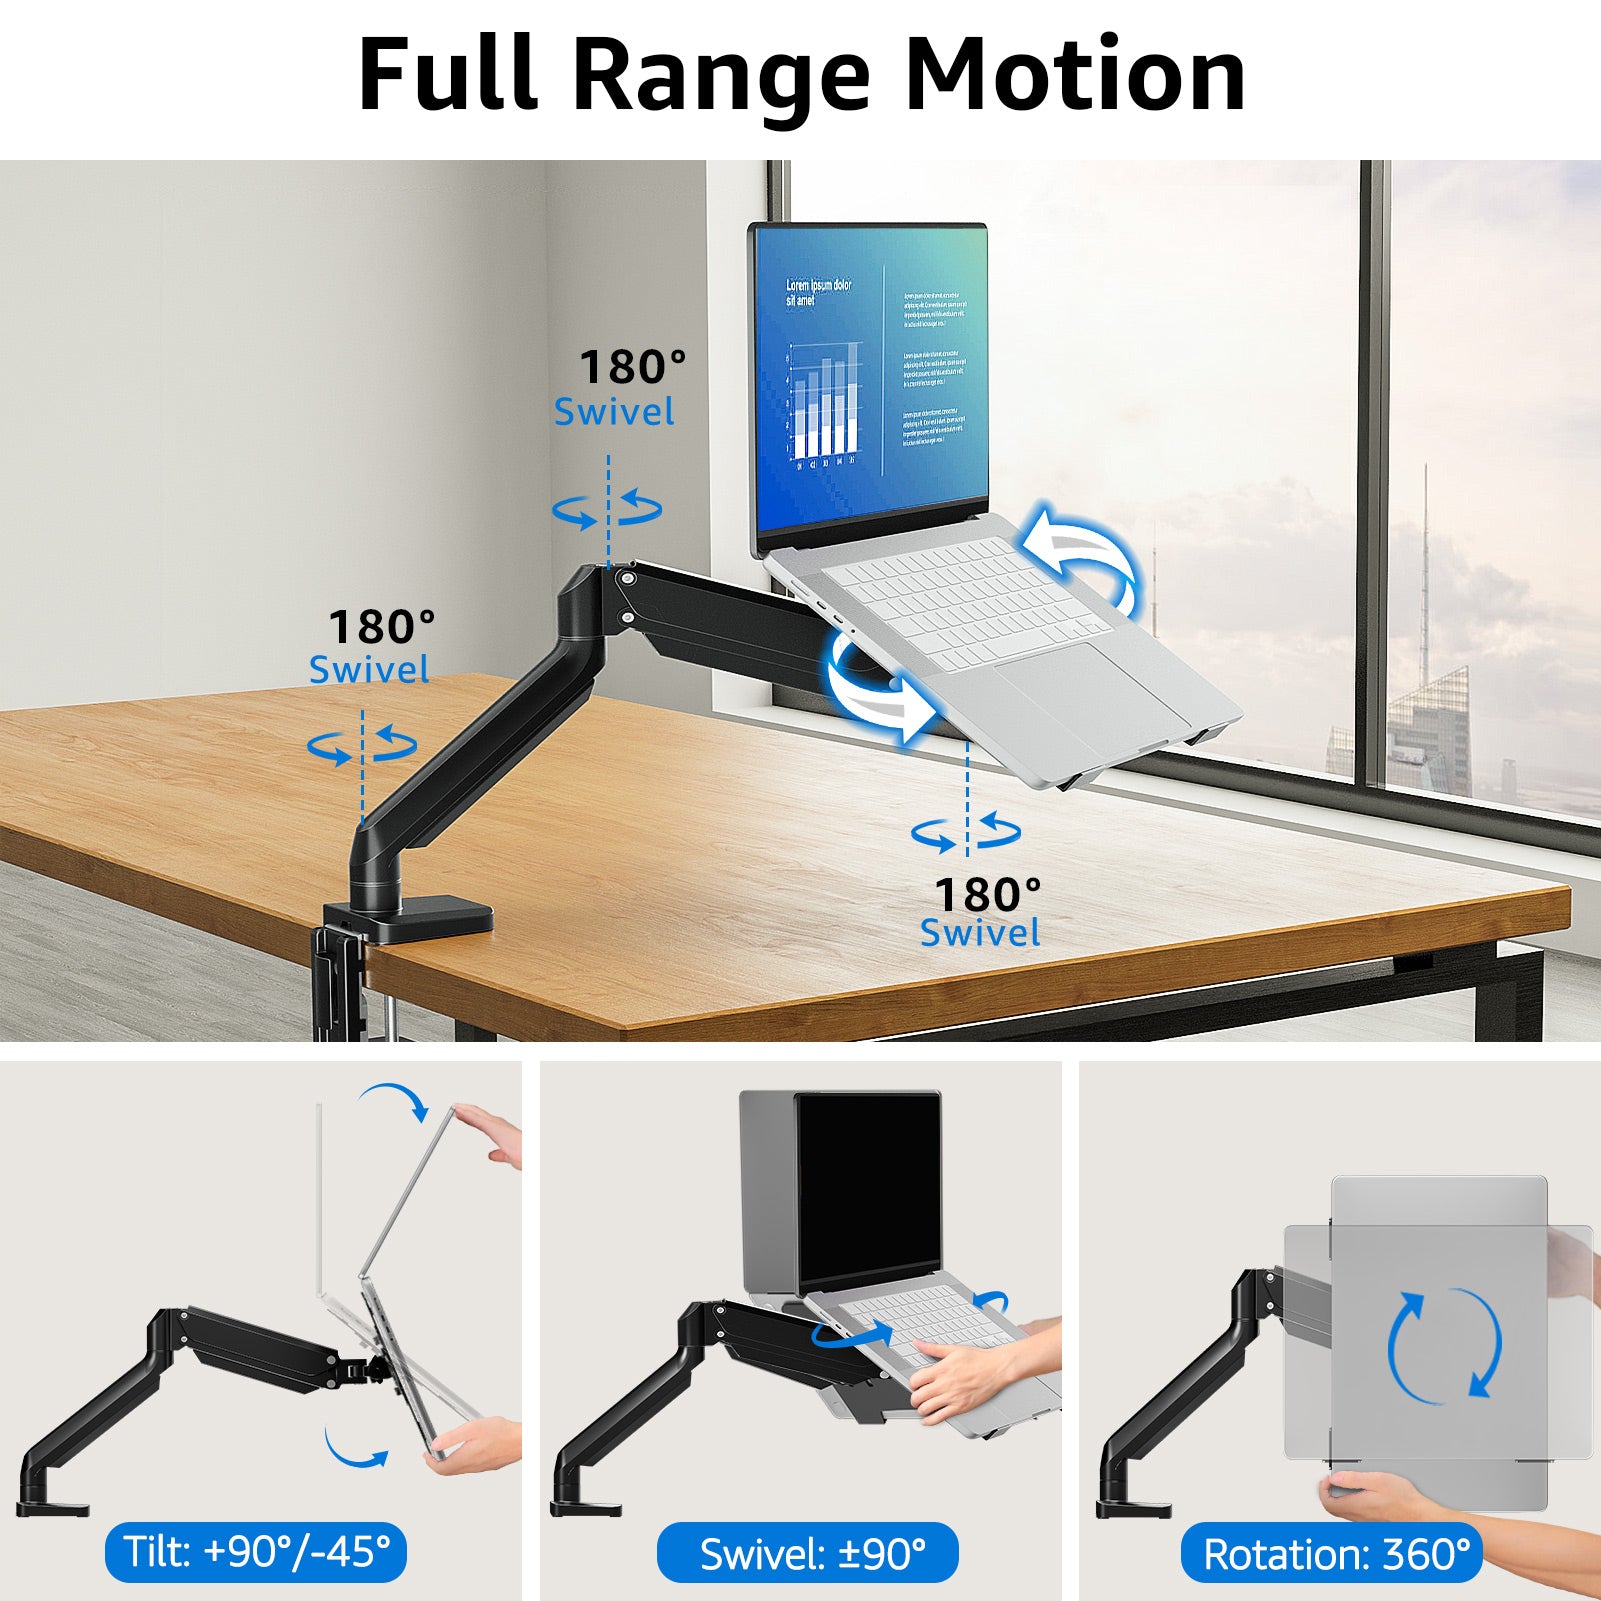 MOUNTUP Laptop Arm Mount for Desk Holds 3.3-17.6lbs MU4007